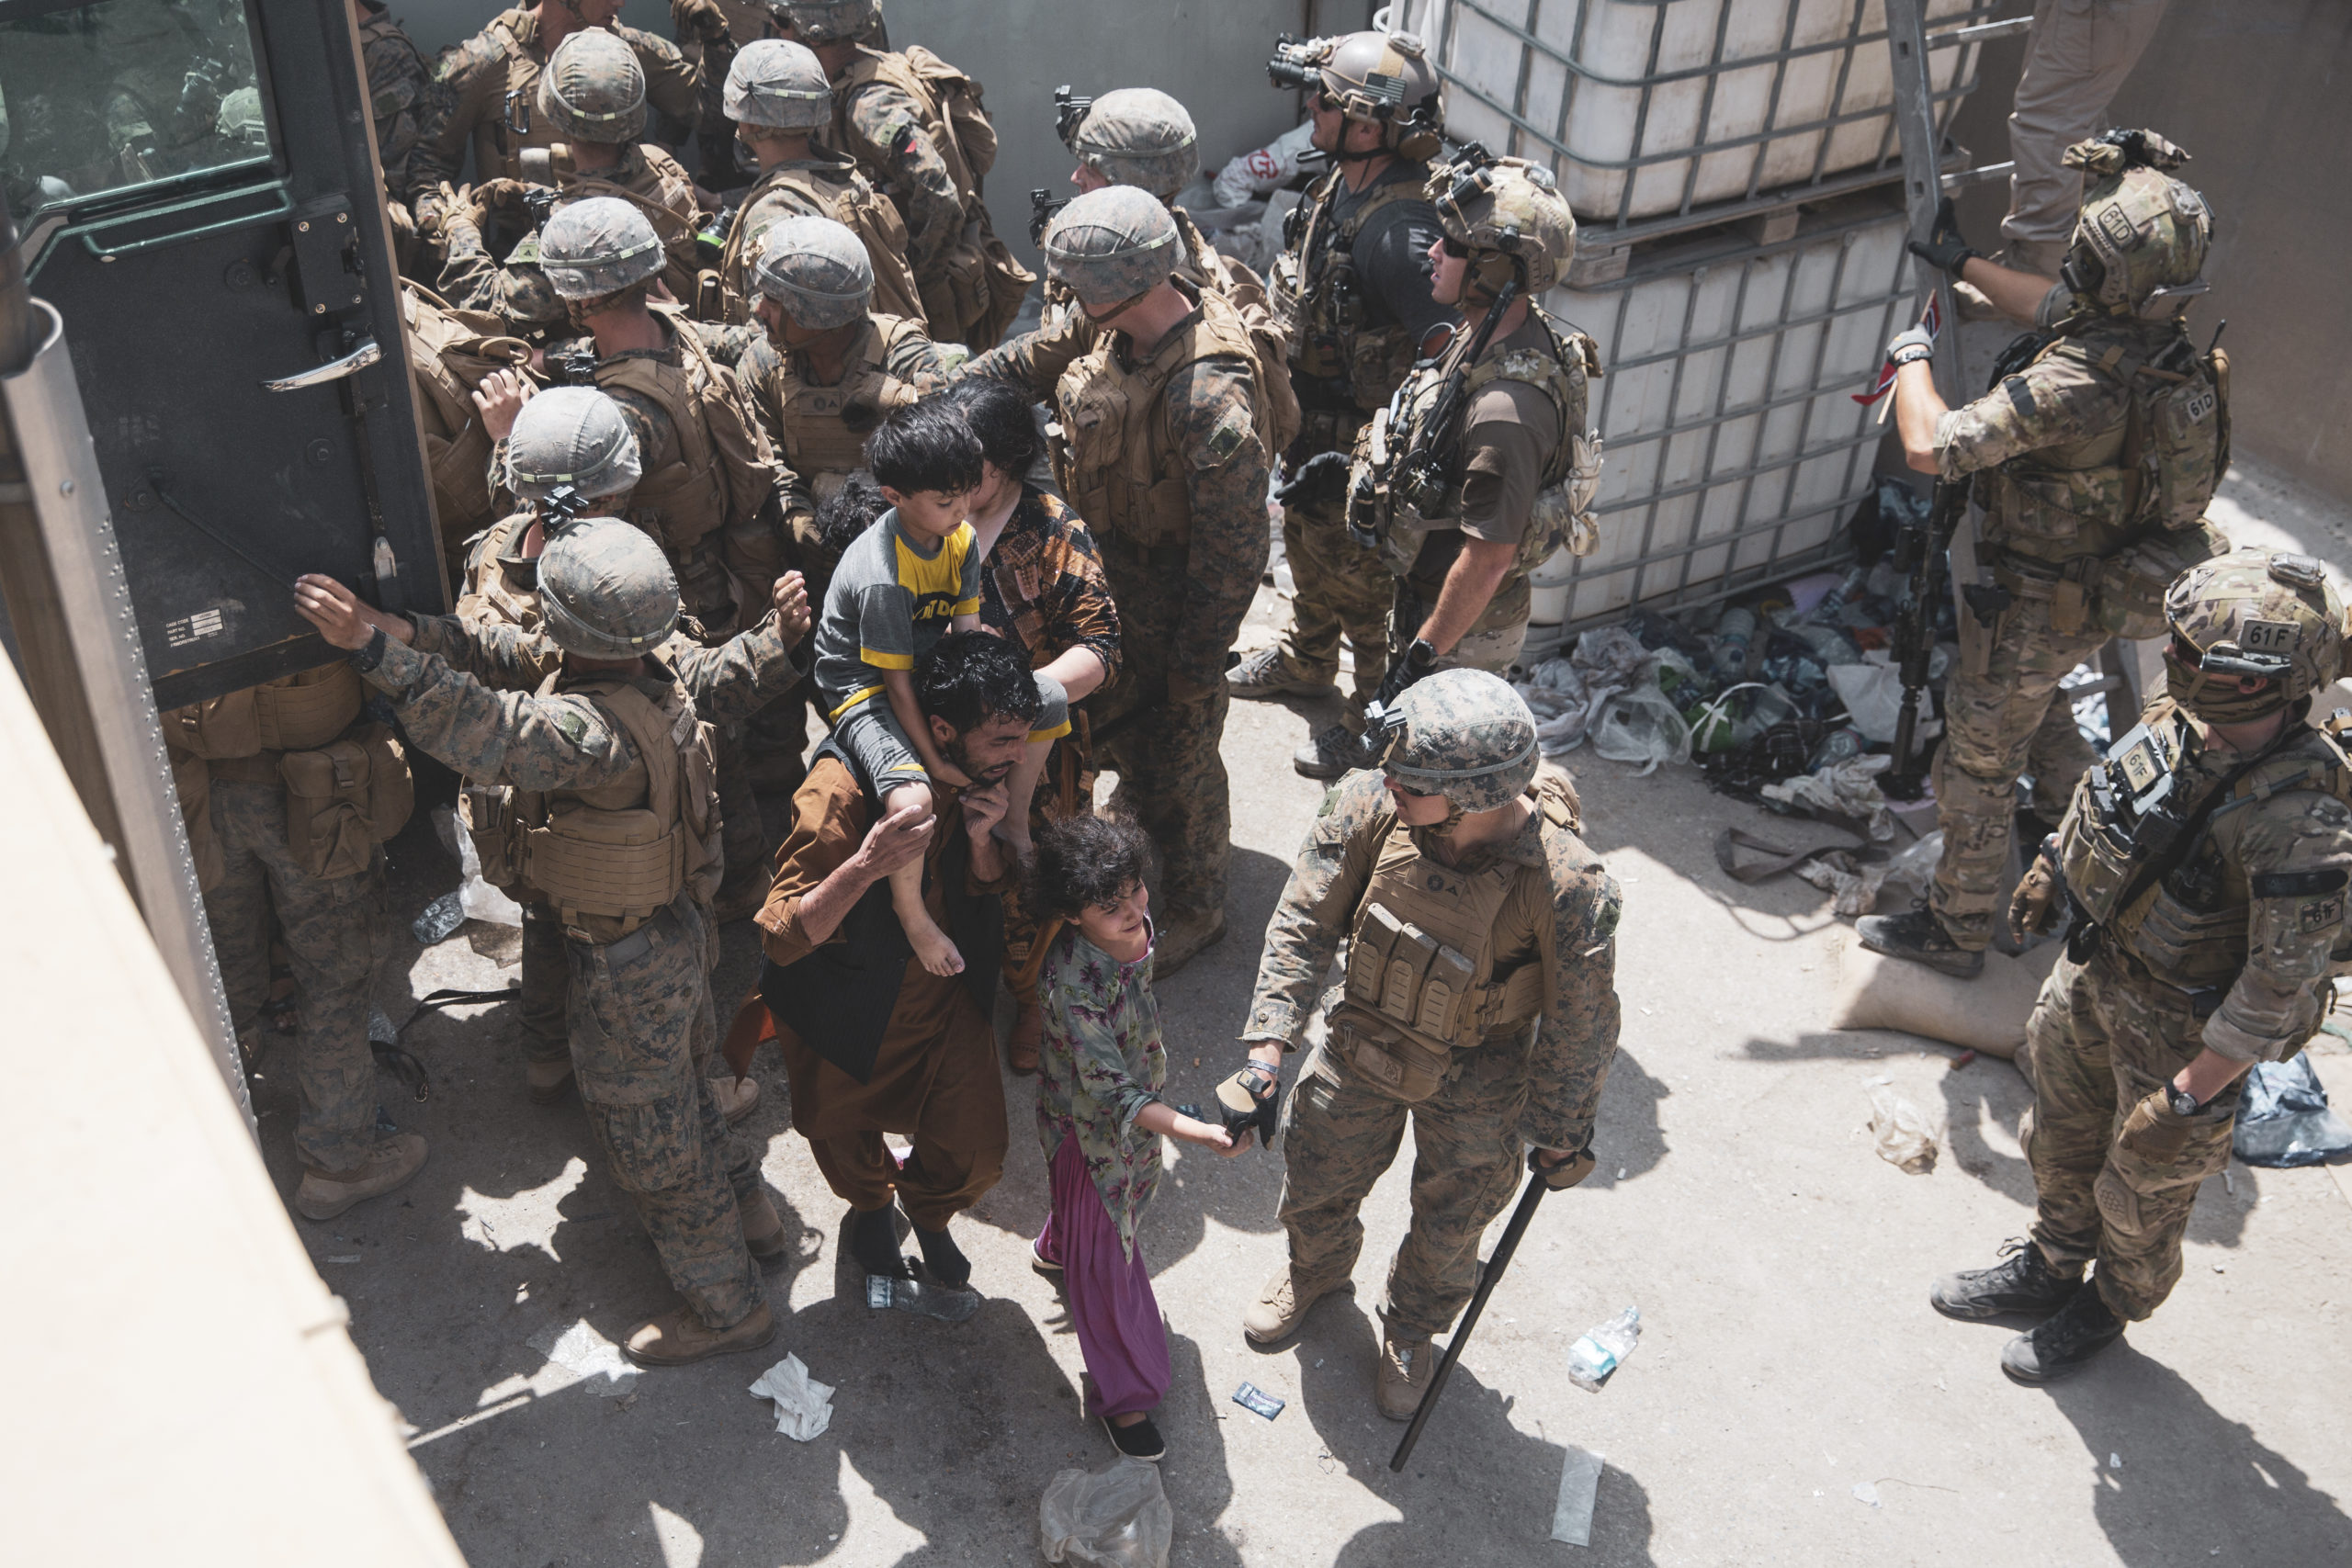 U.S. Marines assist with security at an evacuation checkpoint ensuring evacuees are processed safely at Hamid Karzai International Airport on Aug. 20. (Staff Sgt. Victor Mancilla/U.S. Marine Corps via Getty Images)